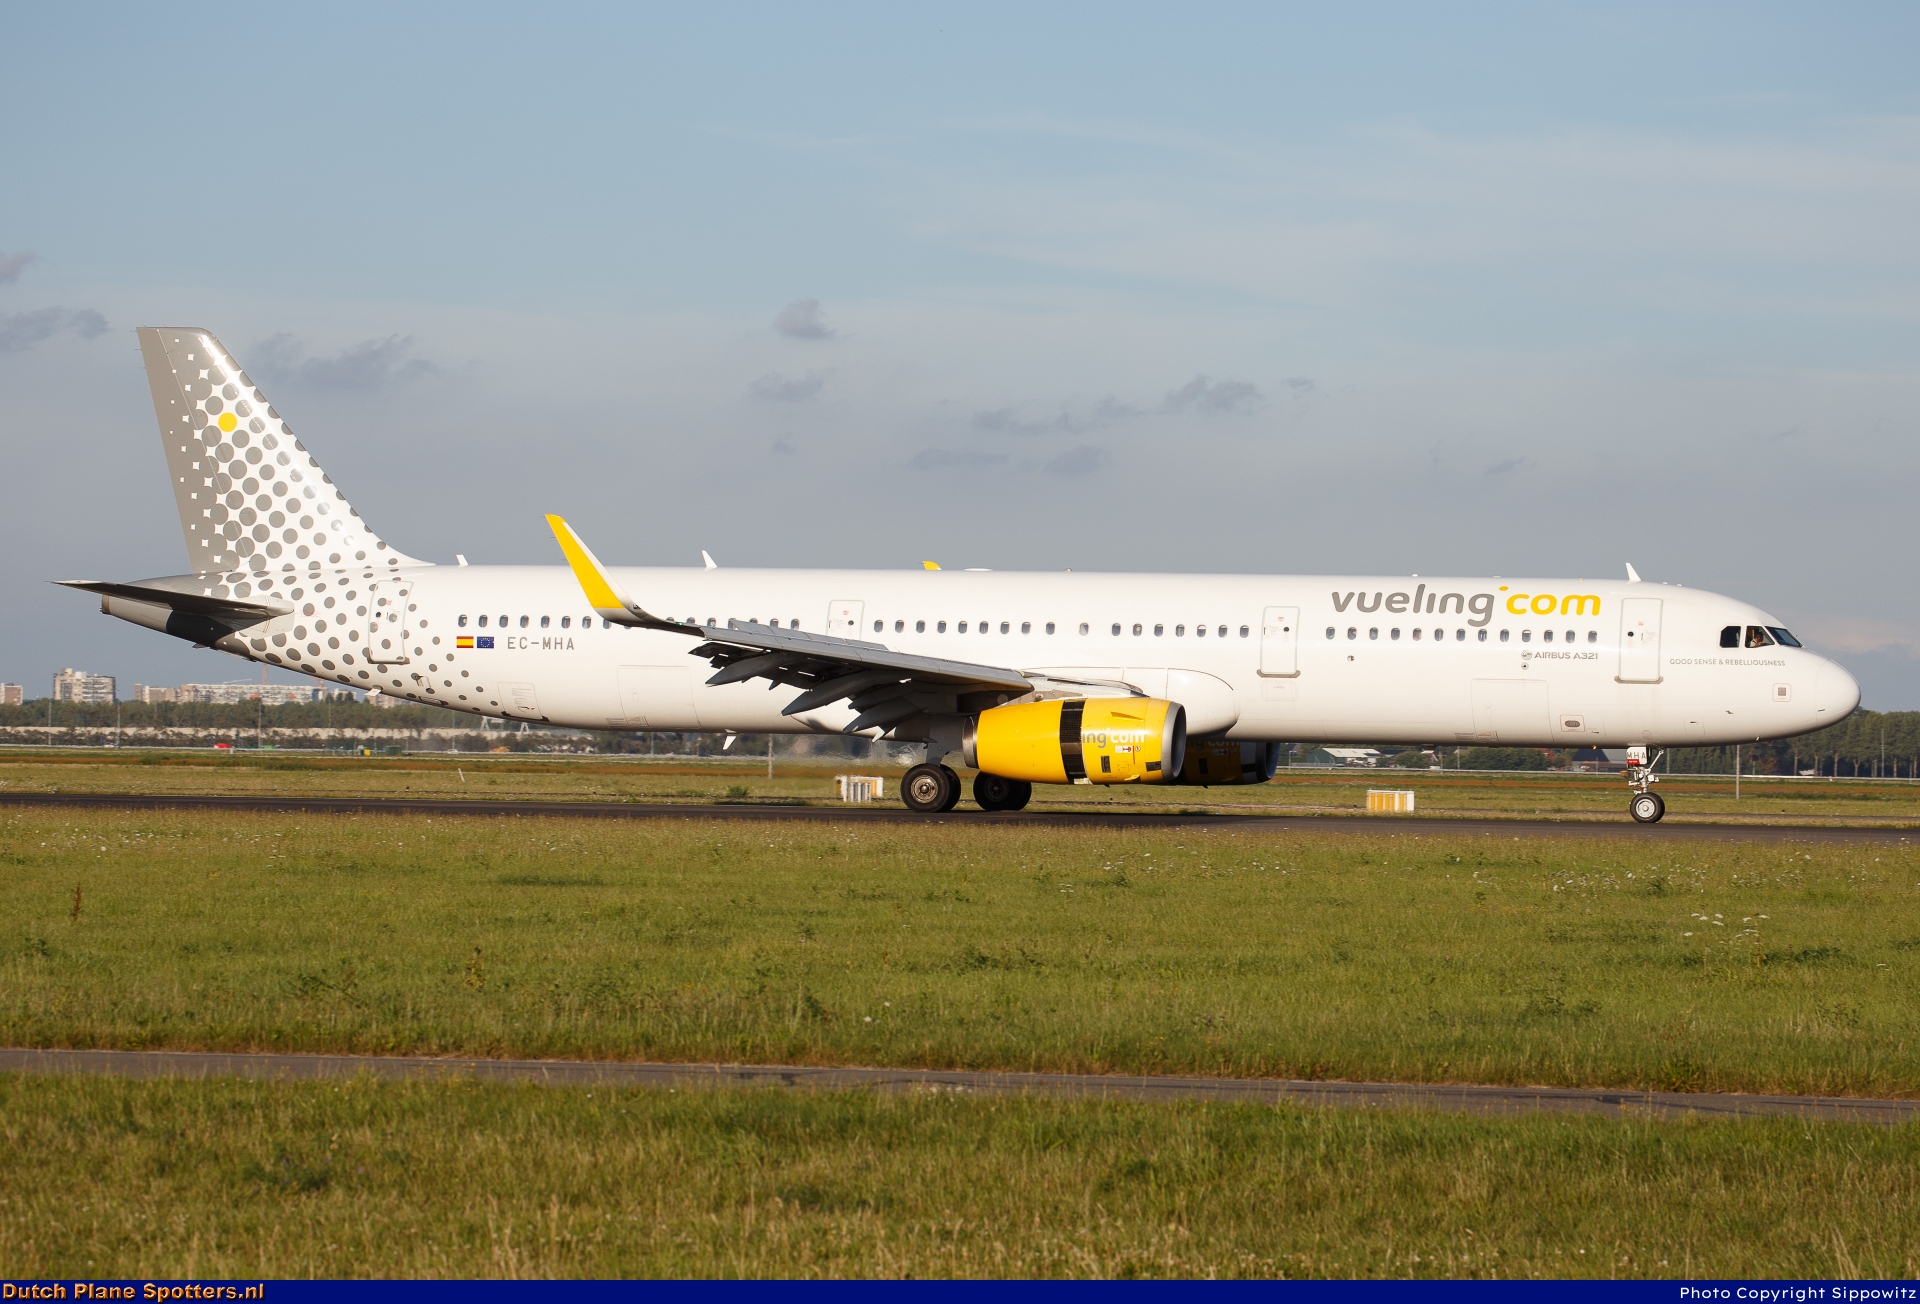 EC-MHA Airbus A321 Vueling.com by Sippowitz